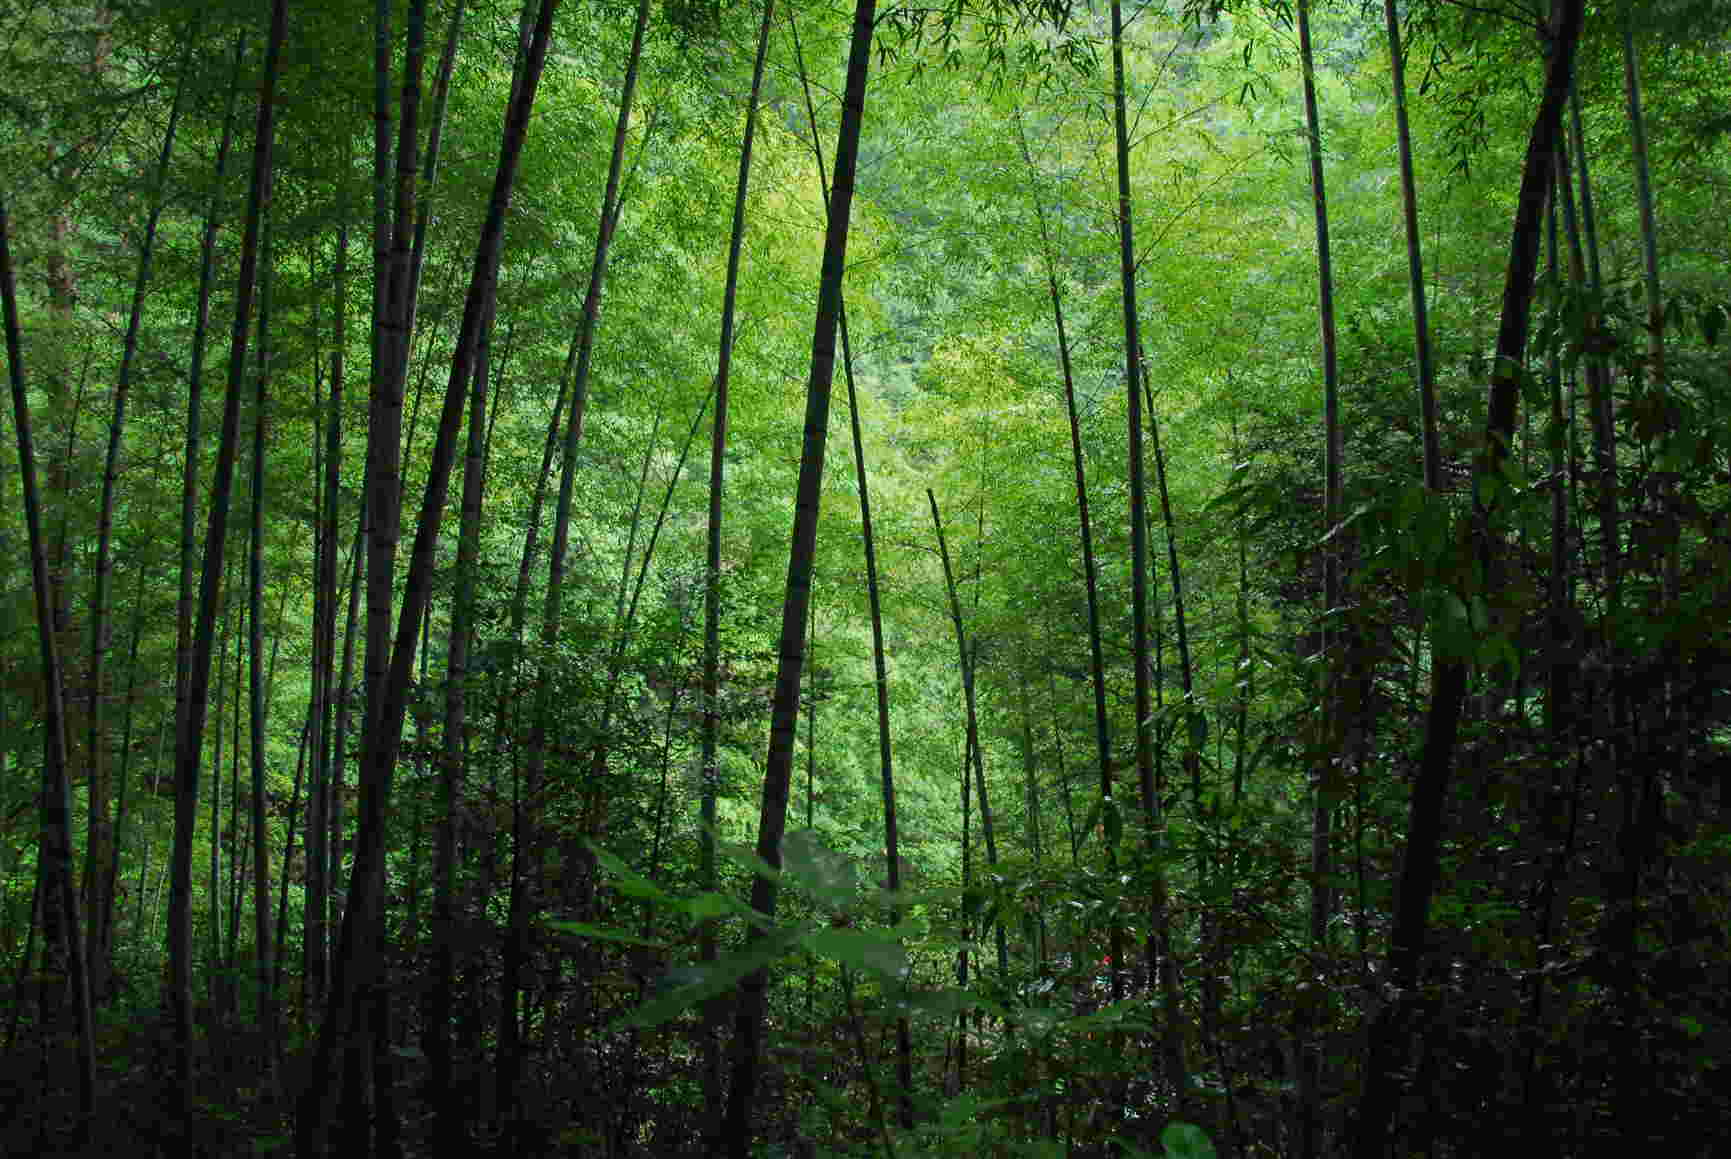 Bamboo forest pic